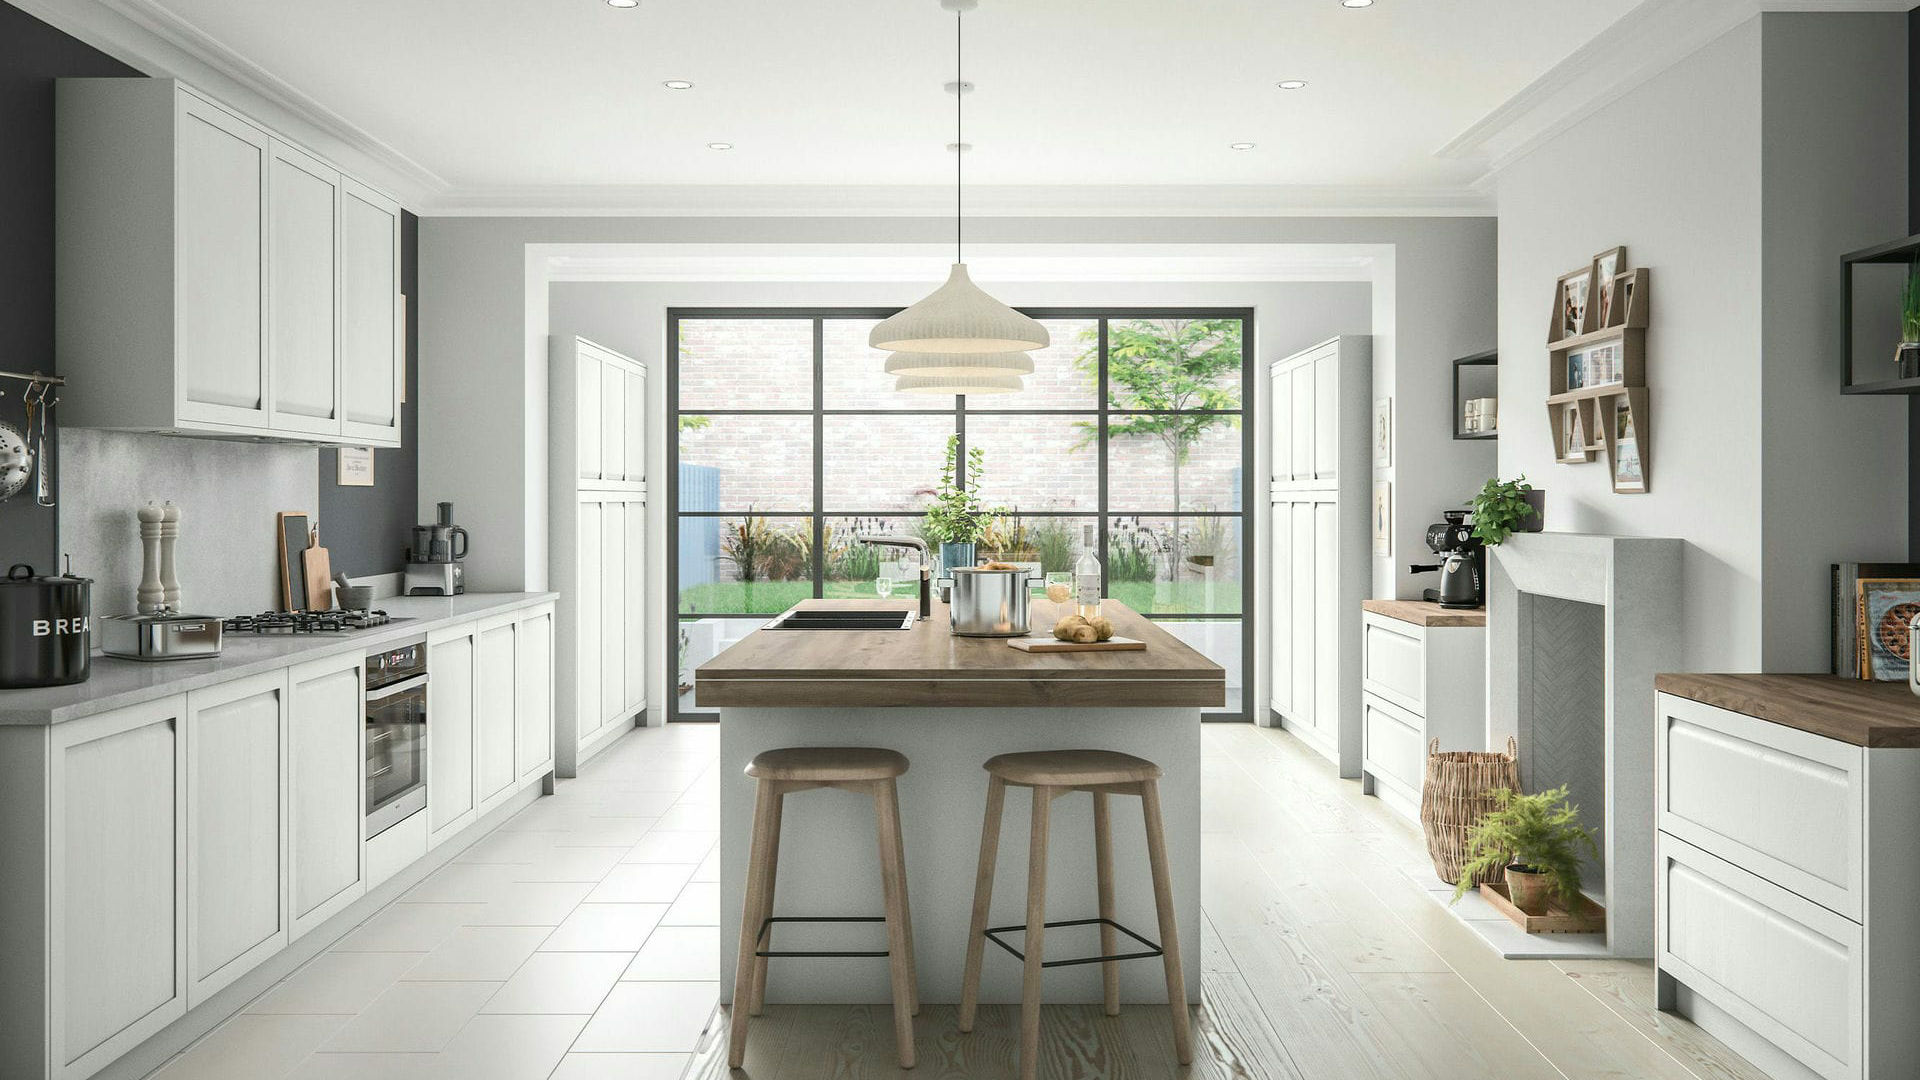 Handleless solid wood light grey kitchens blending the warmth of wood with a contemporary light grey palette